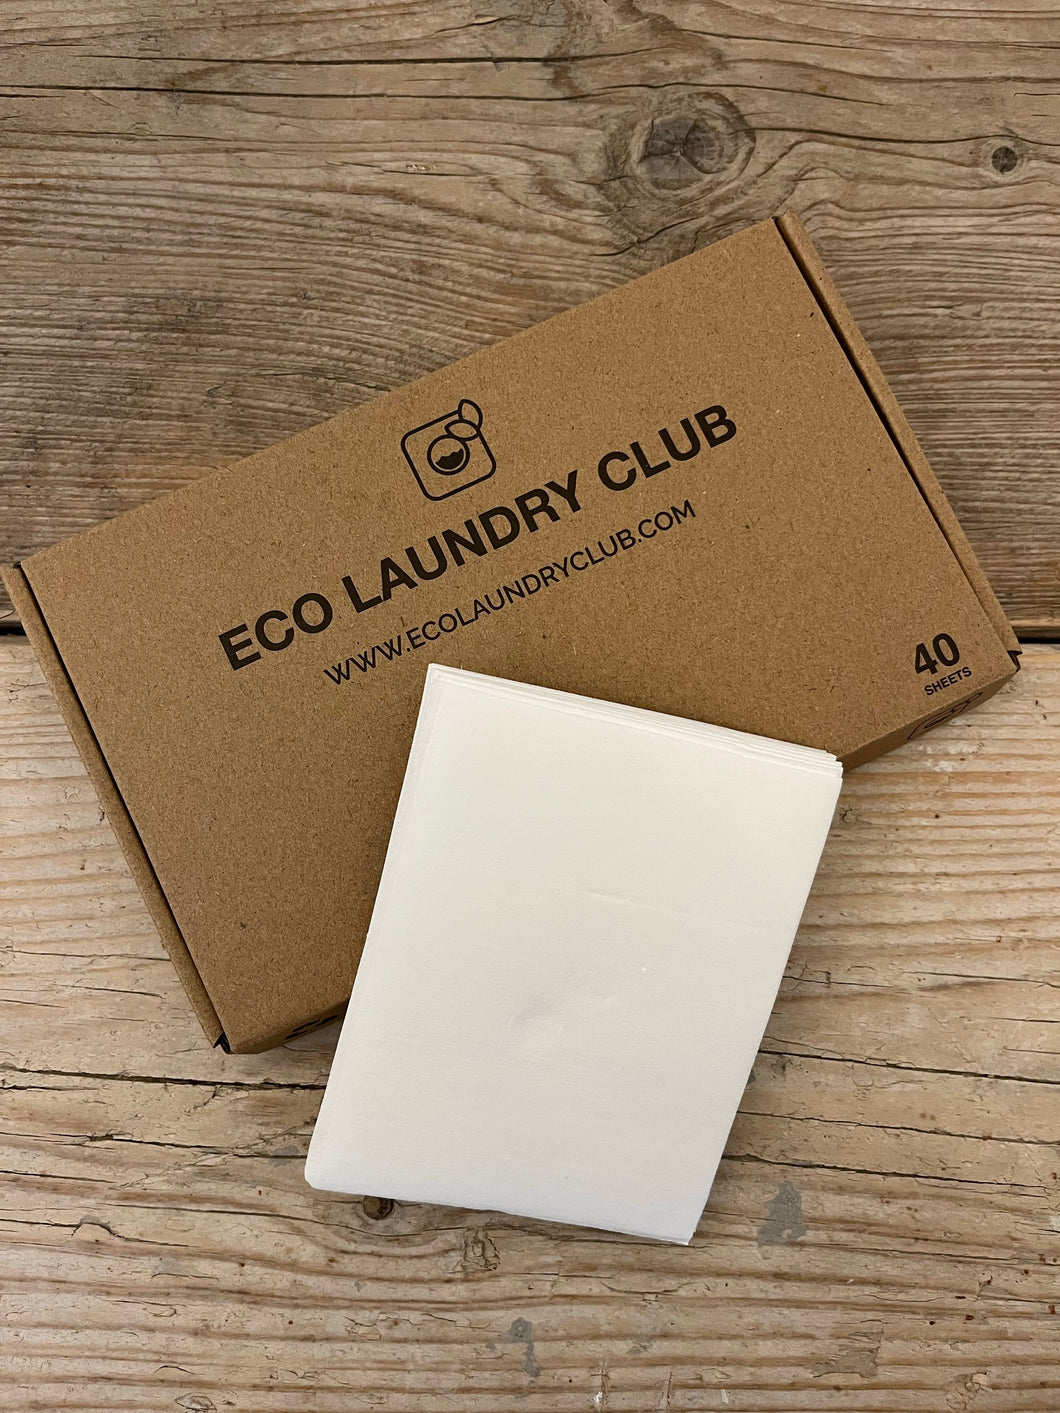 eco laundry club - laundry detergent sheets